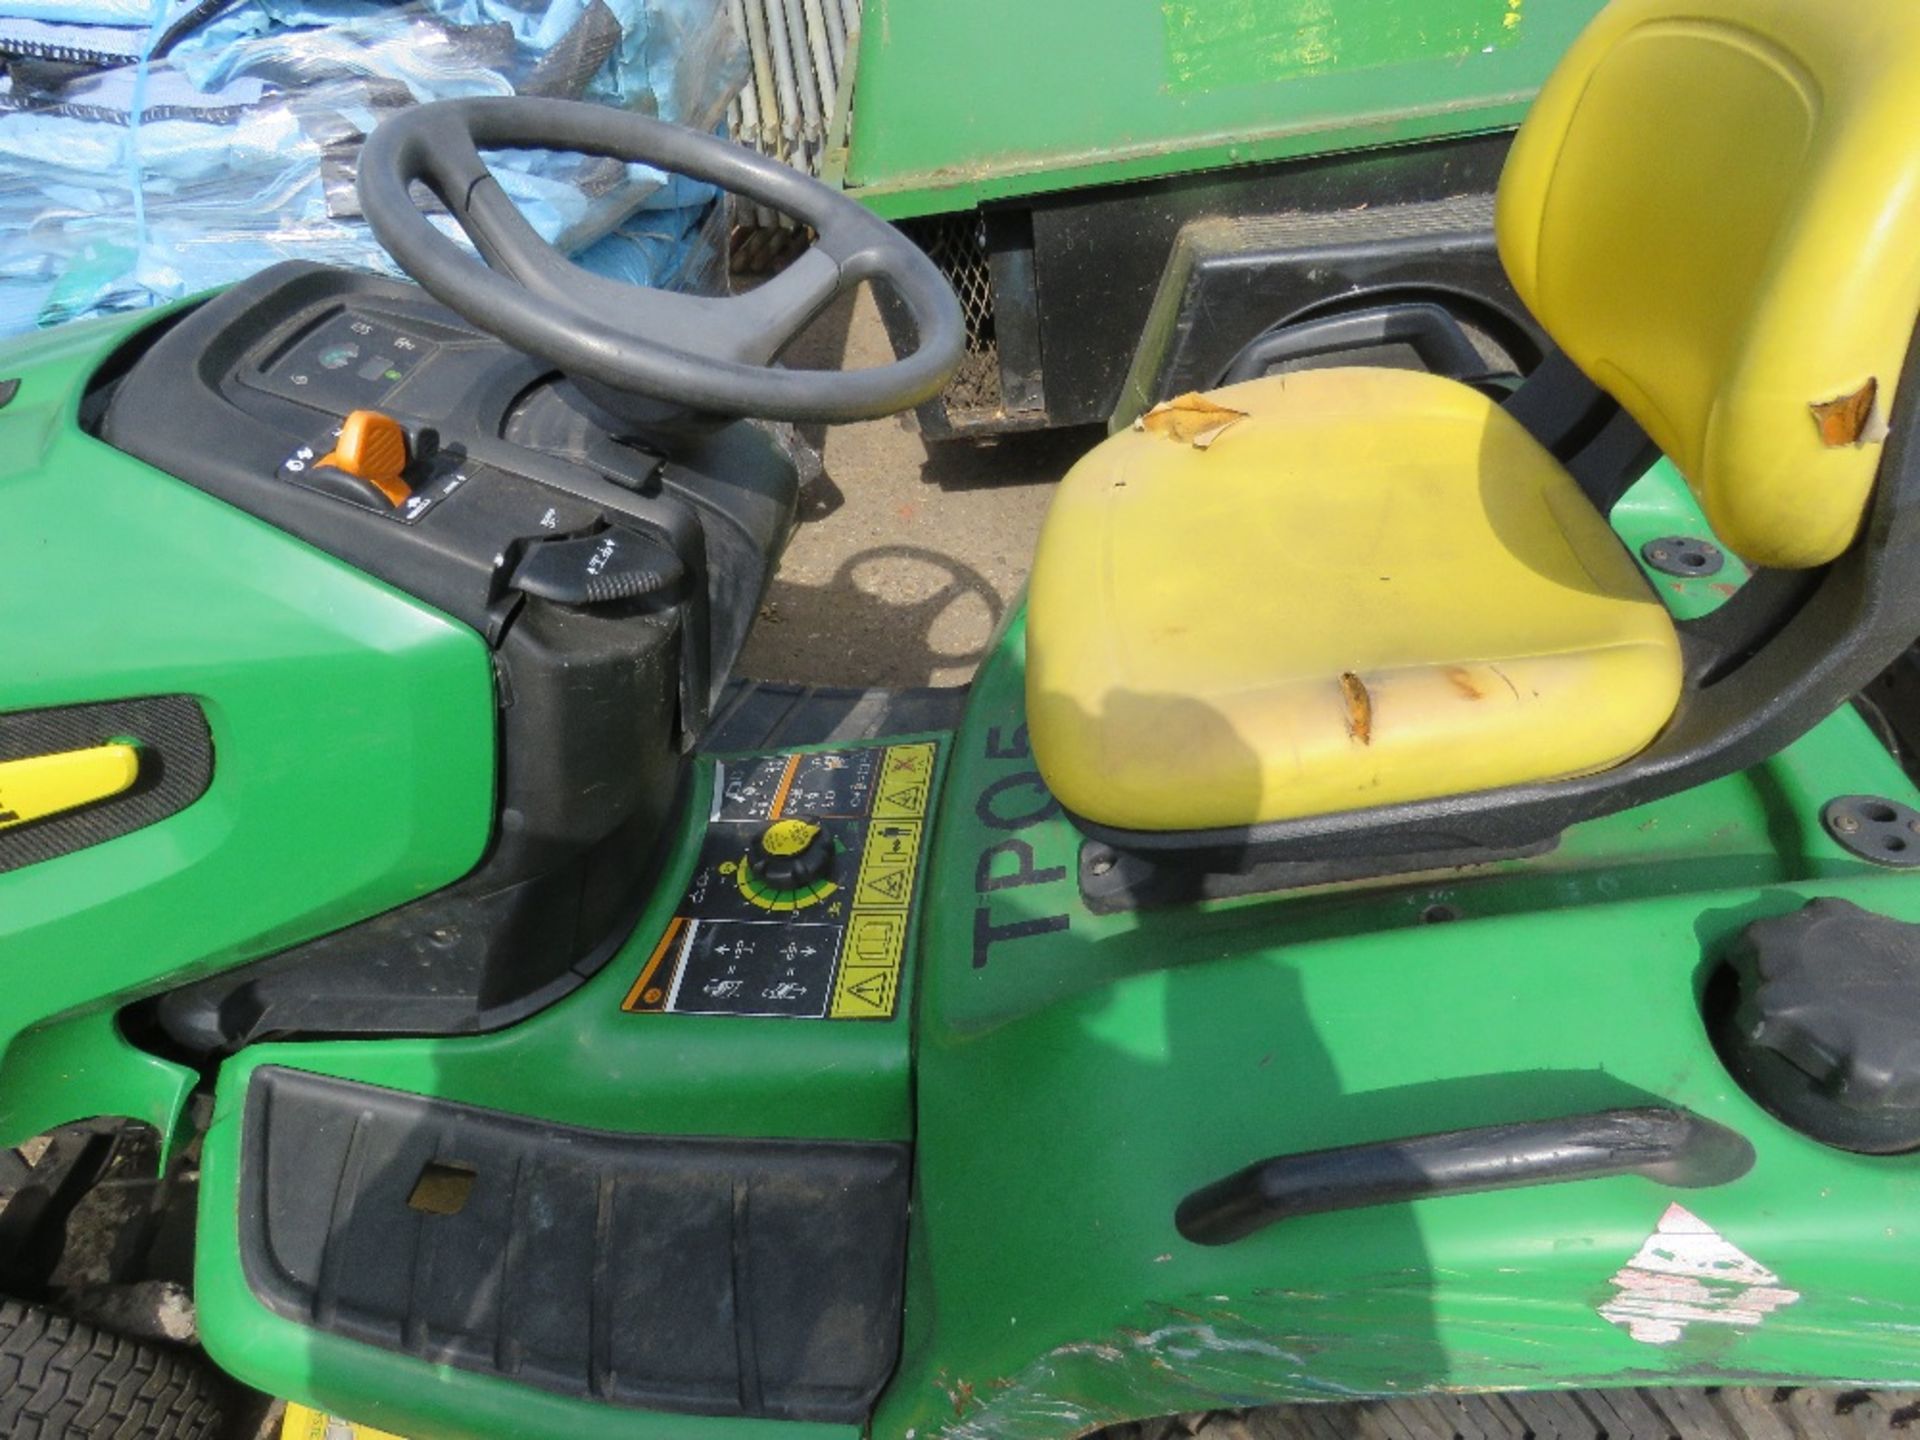 JOHN DEERE X540 PROFESSIONAL RIDE ON PETROL MOWER. PREVIOUS COUNCIL USEAGE. STRAIGHT FROM STORAGE, - Image 3 of 6